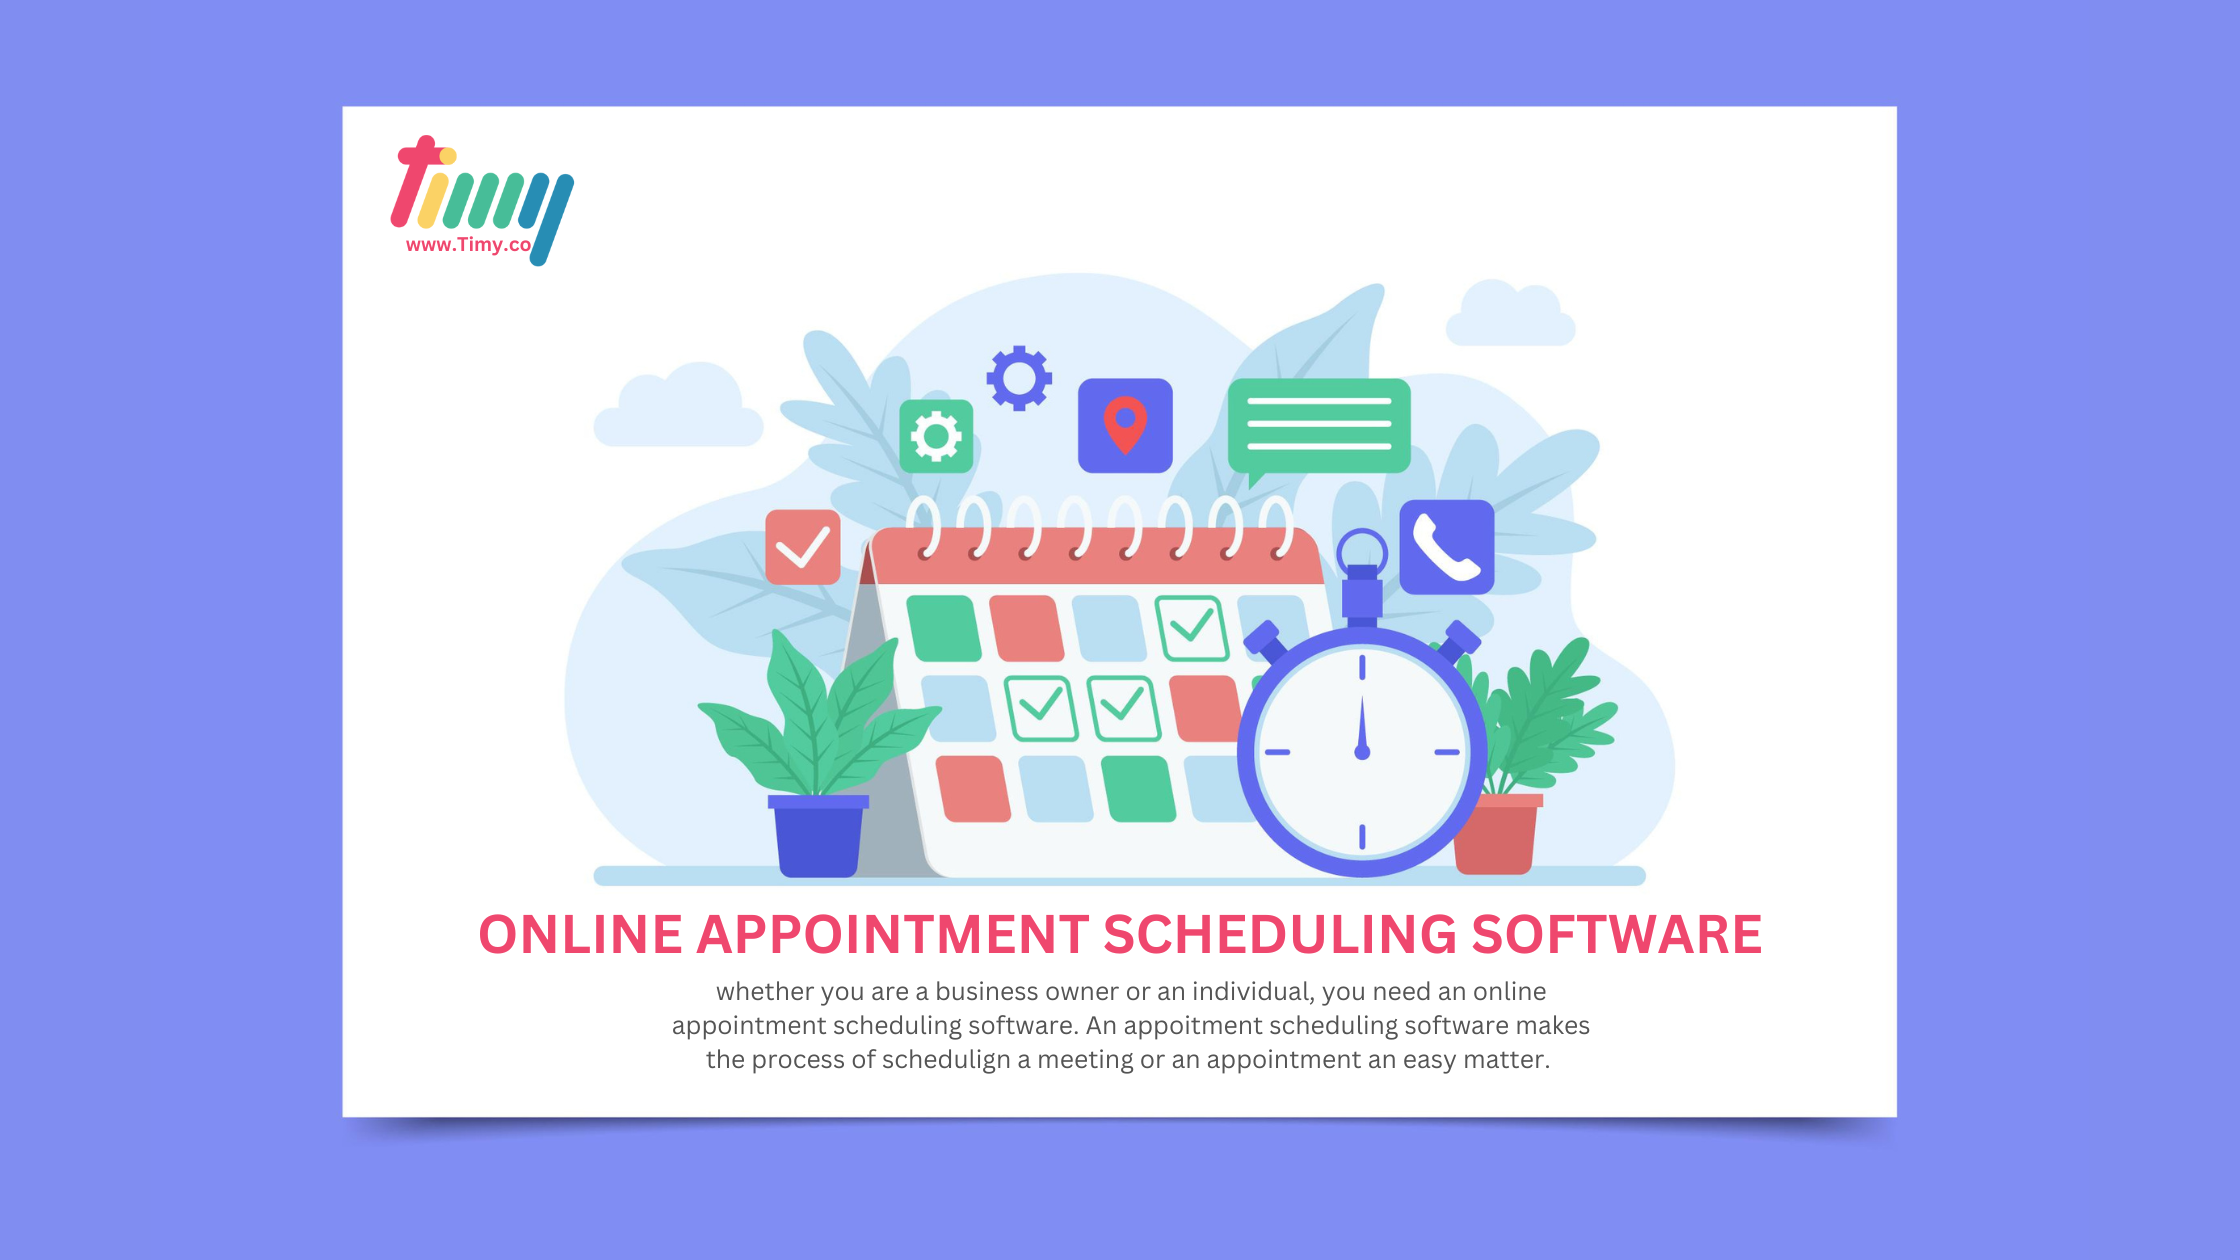 Why you need an online appointment scheduling software?